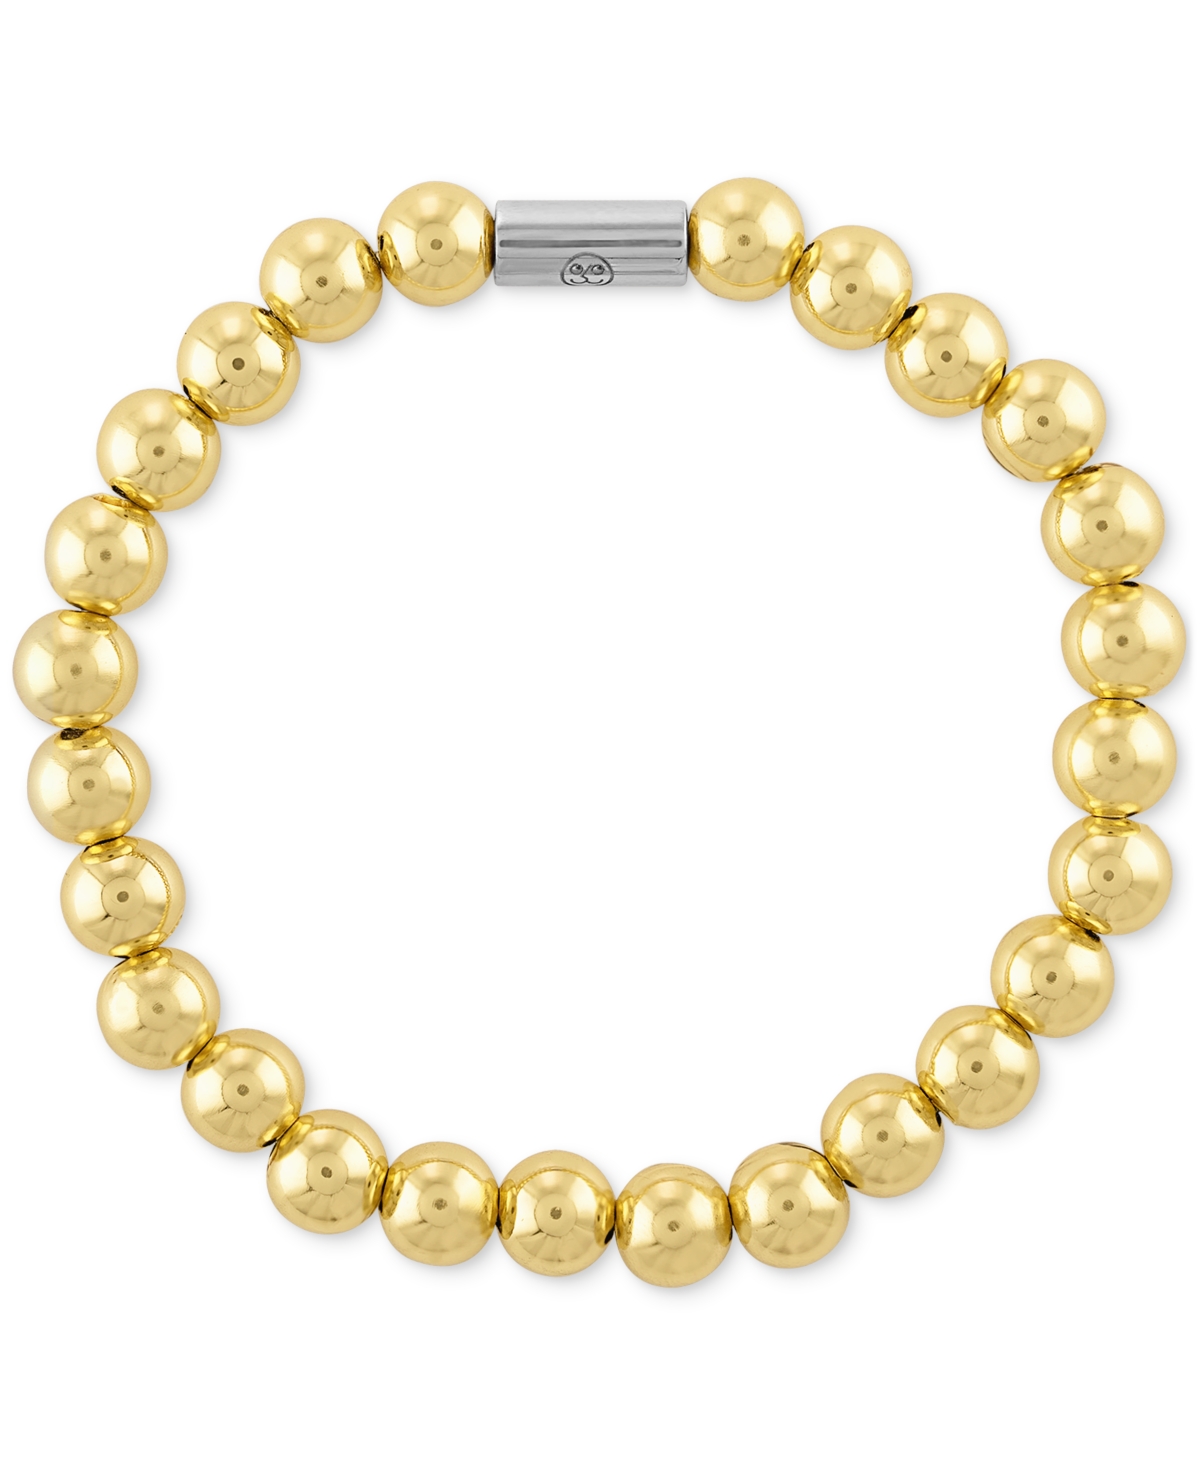 Polished Bead Stretch Bracelet in Sterling Silver & 14k Gold-Plate, Created for Macy's - Gold